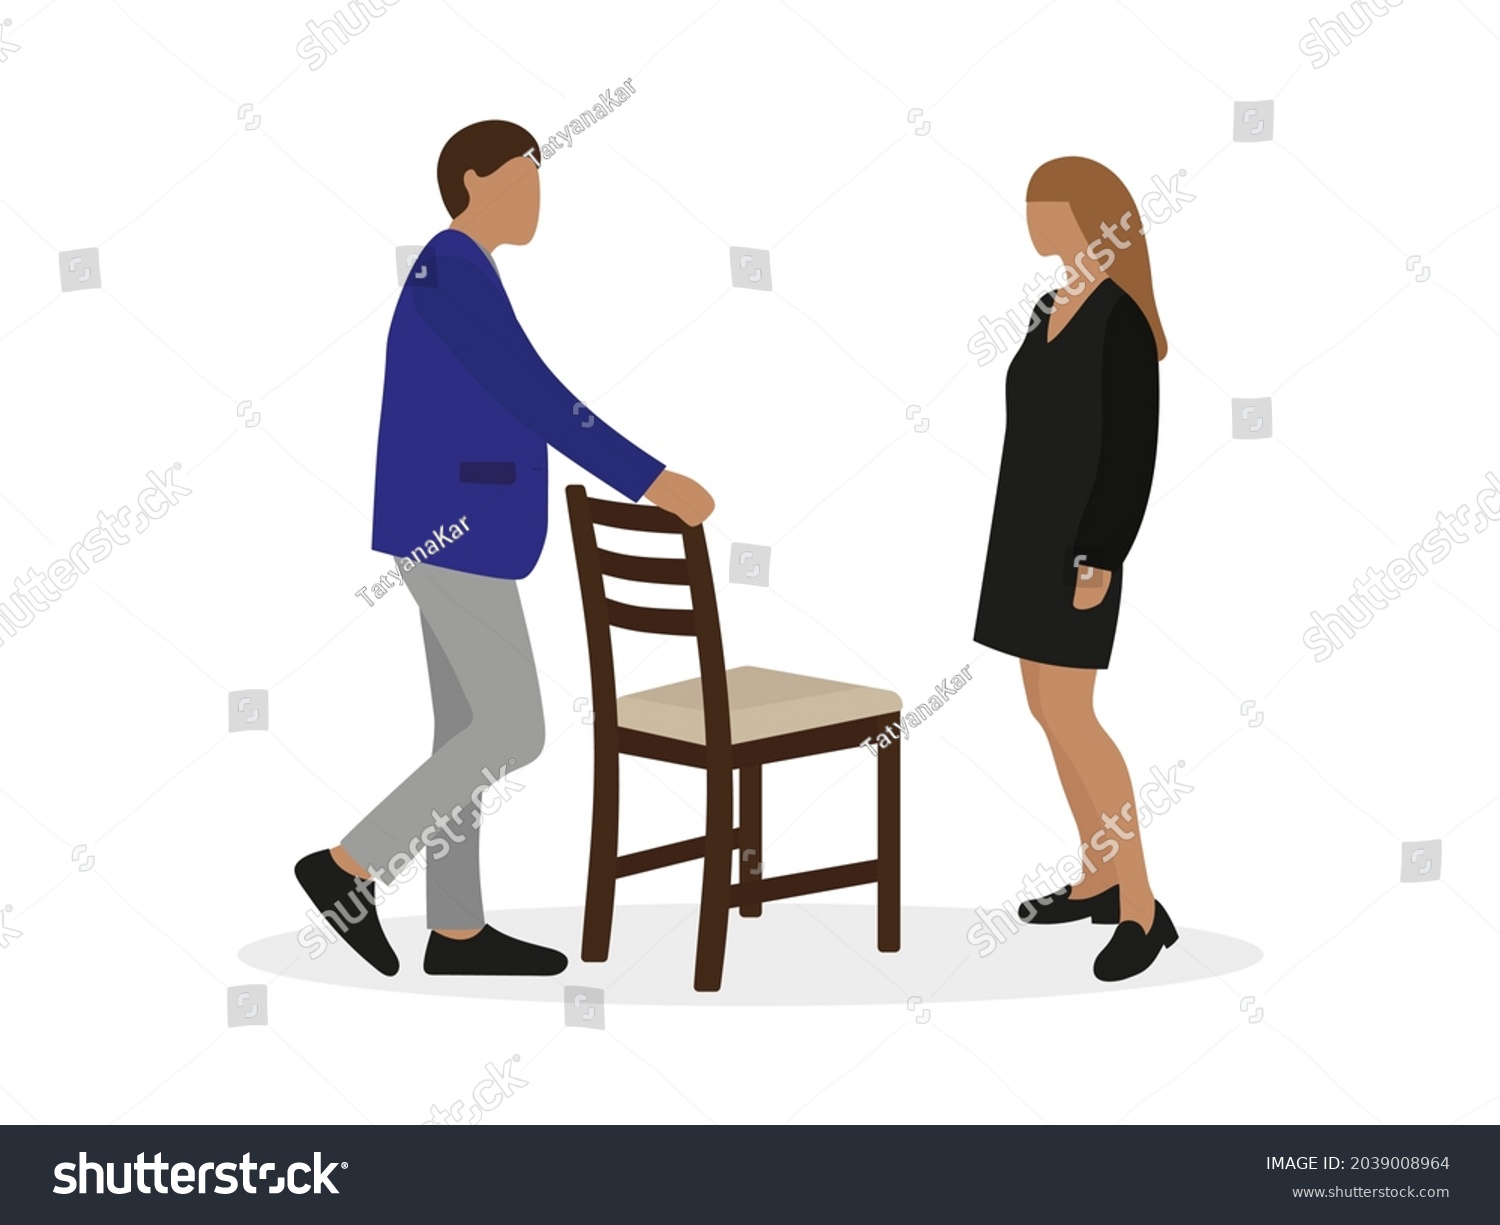 Male Character Invites Sit Down Female Stock Vector (Royalty Free ...